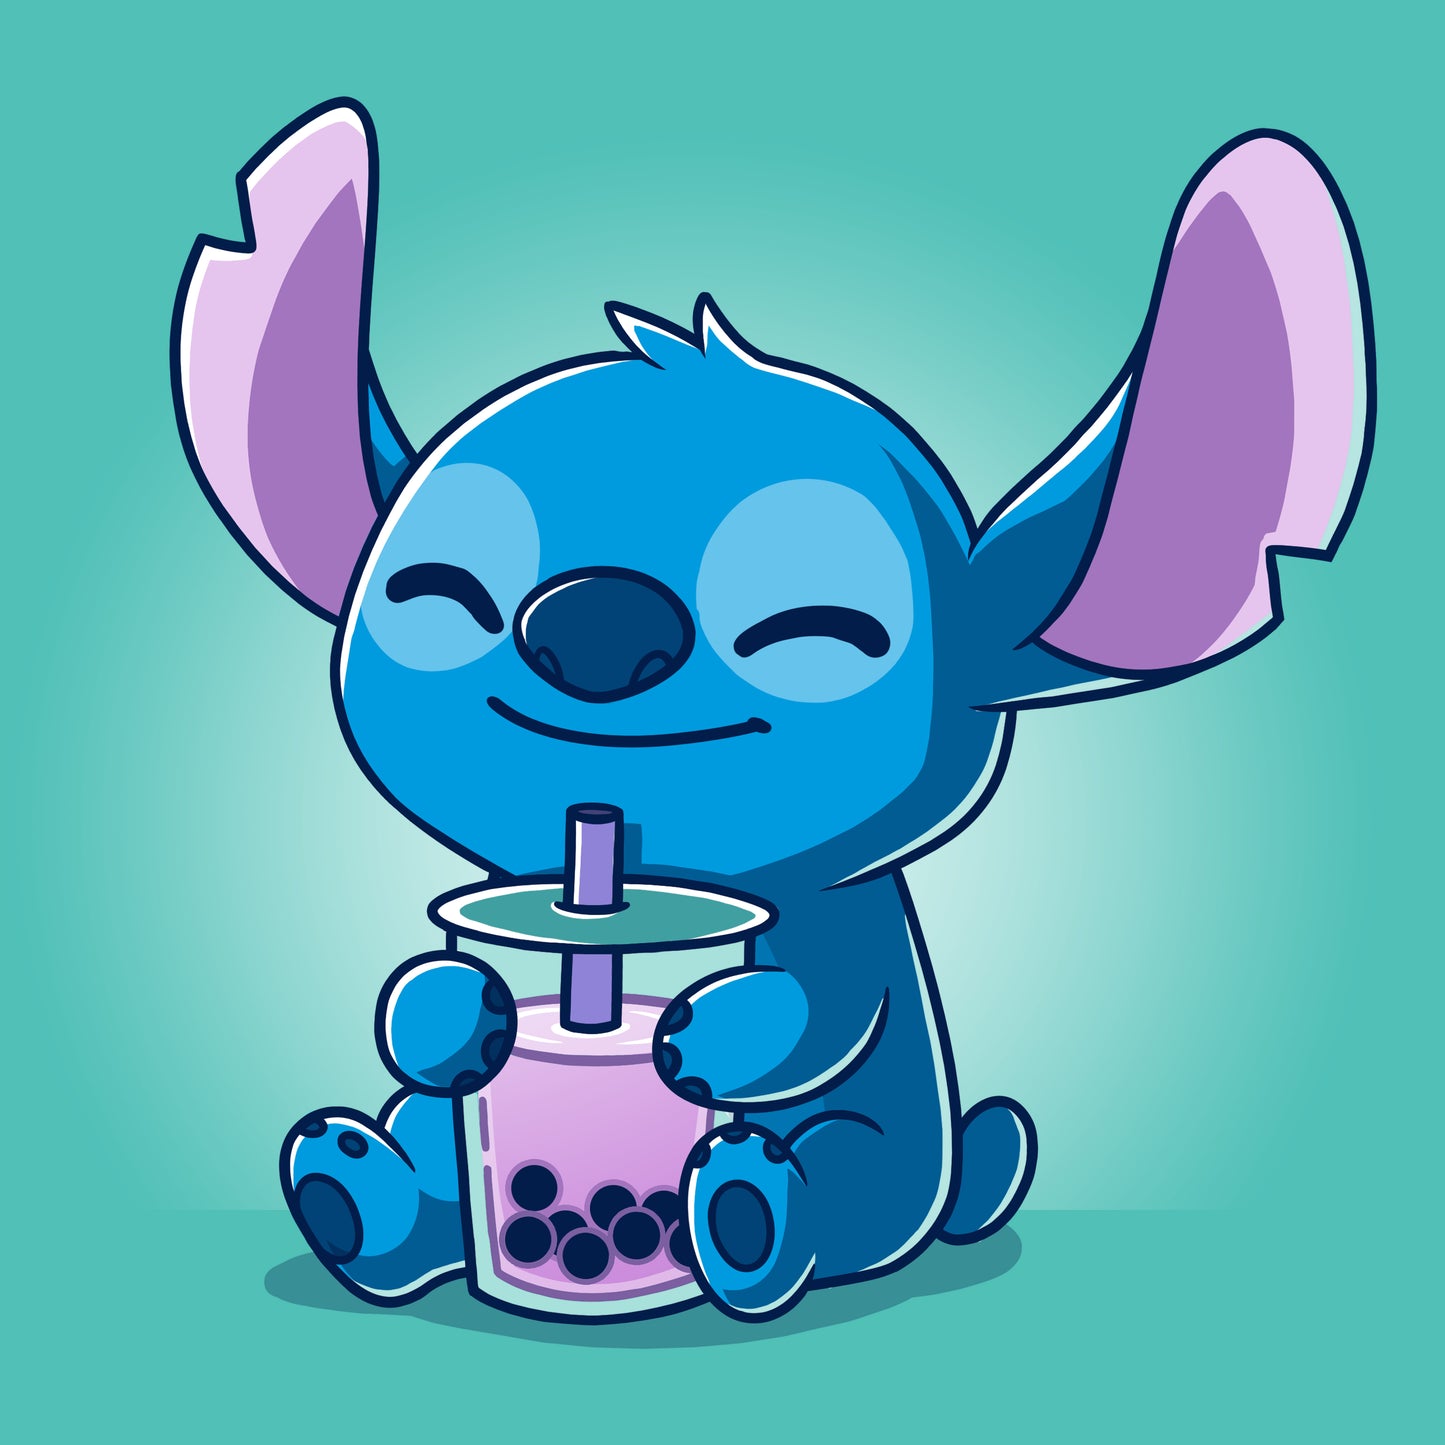 Officially licensed Disney merchandise featuring Boba Stitch.